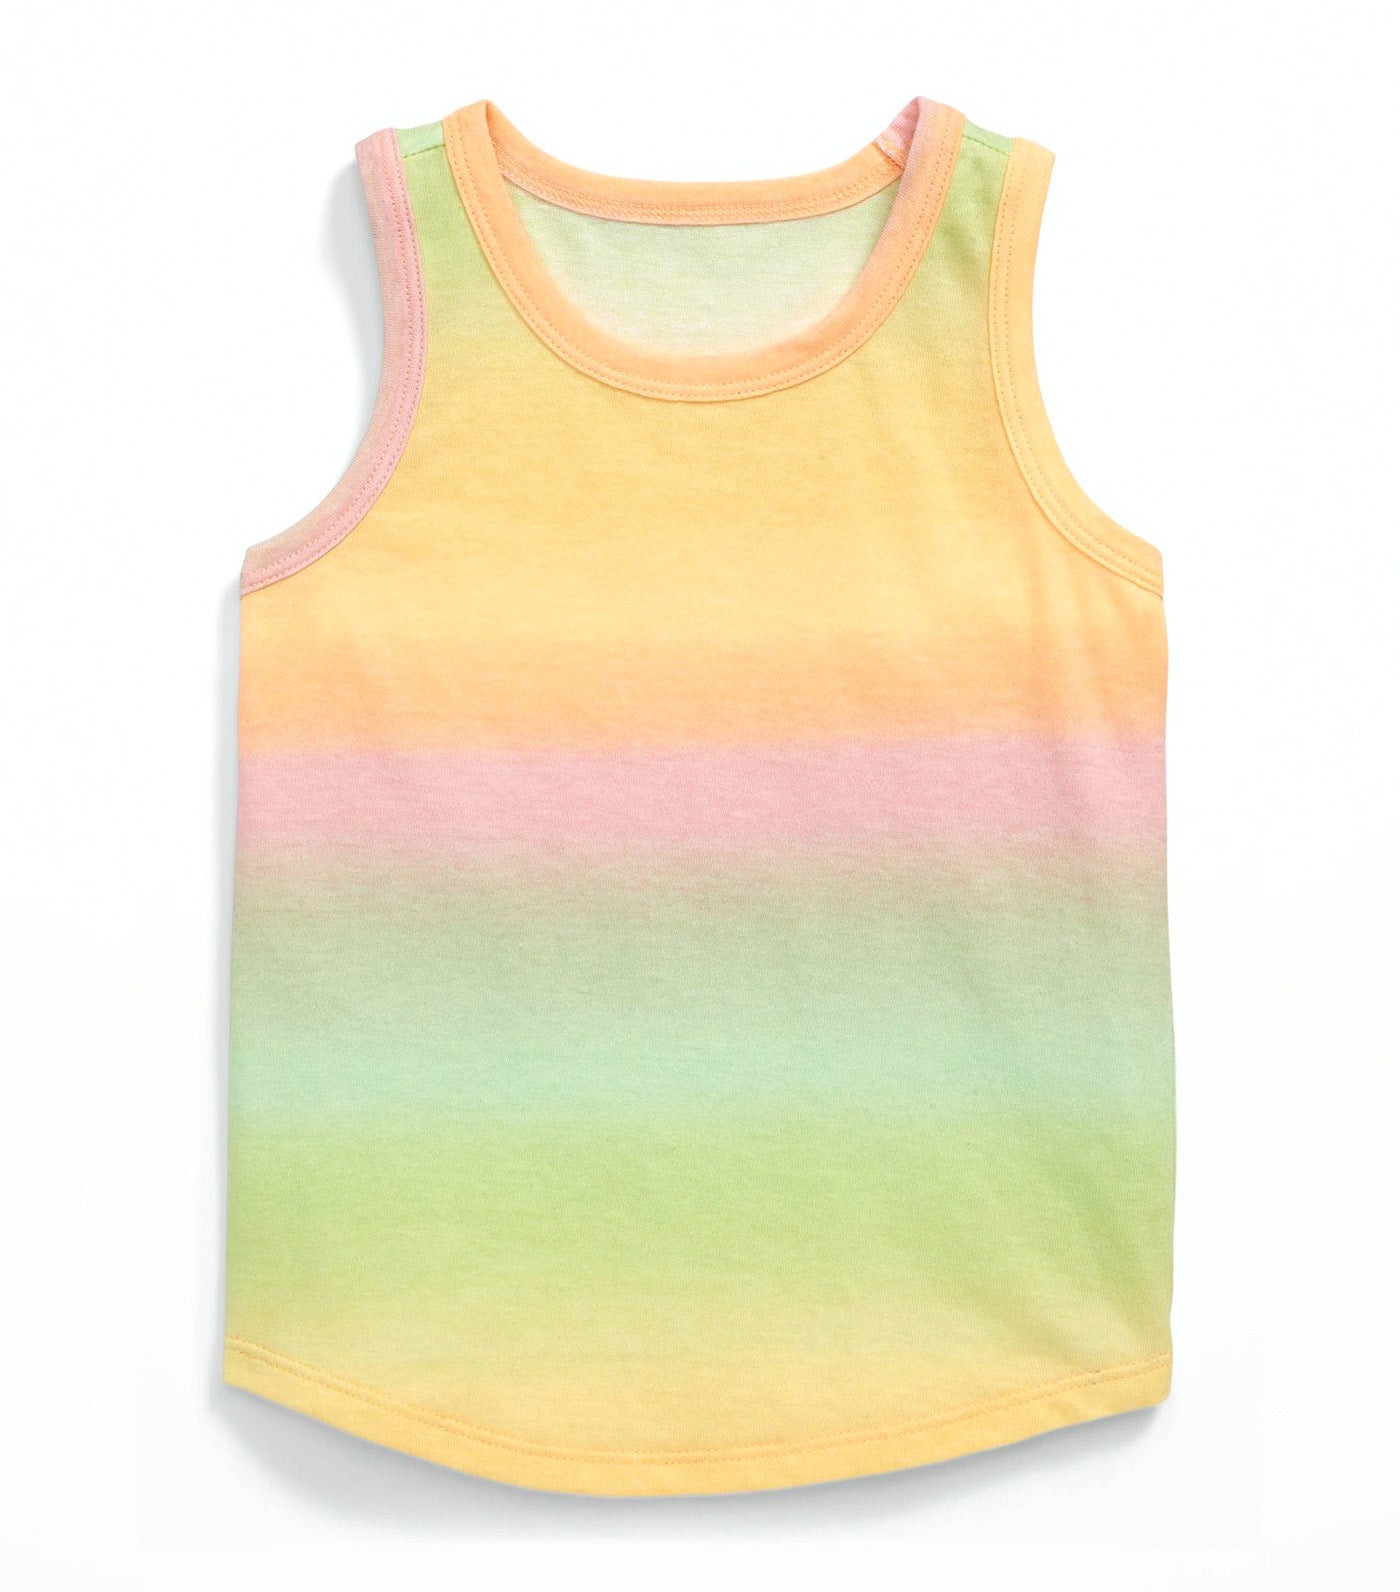 Printed Tank Top for Toddler Girls - Pink/Org Ombre